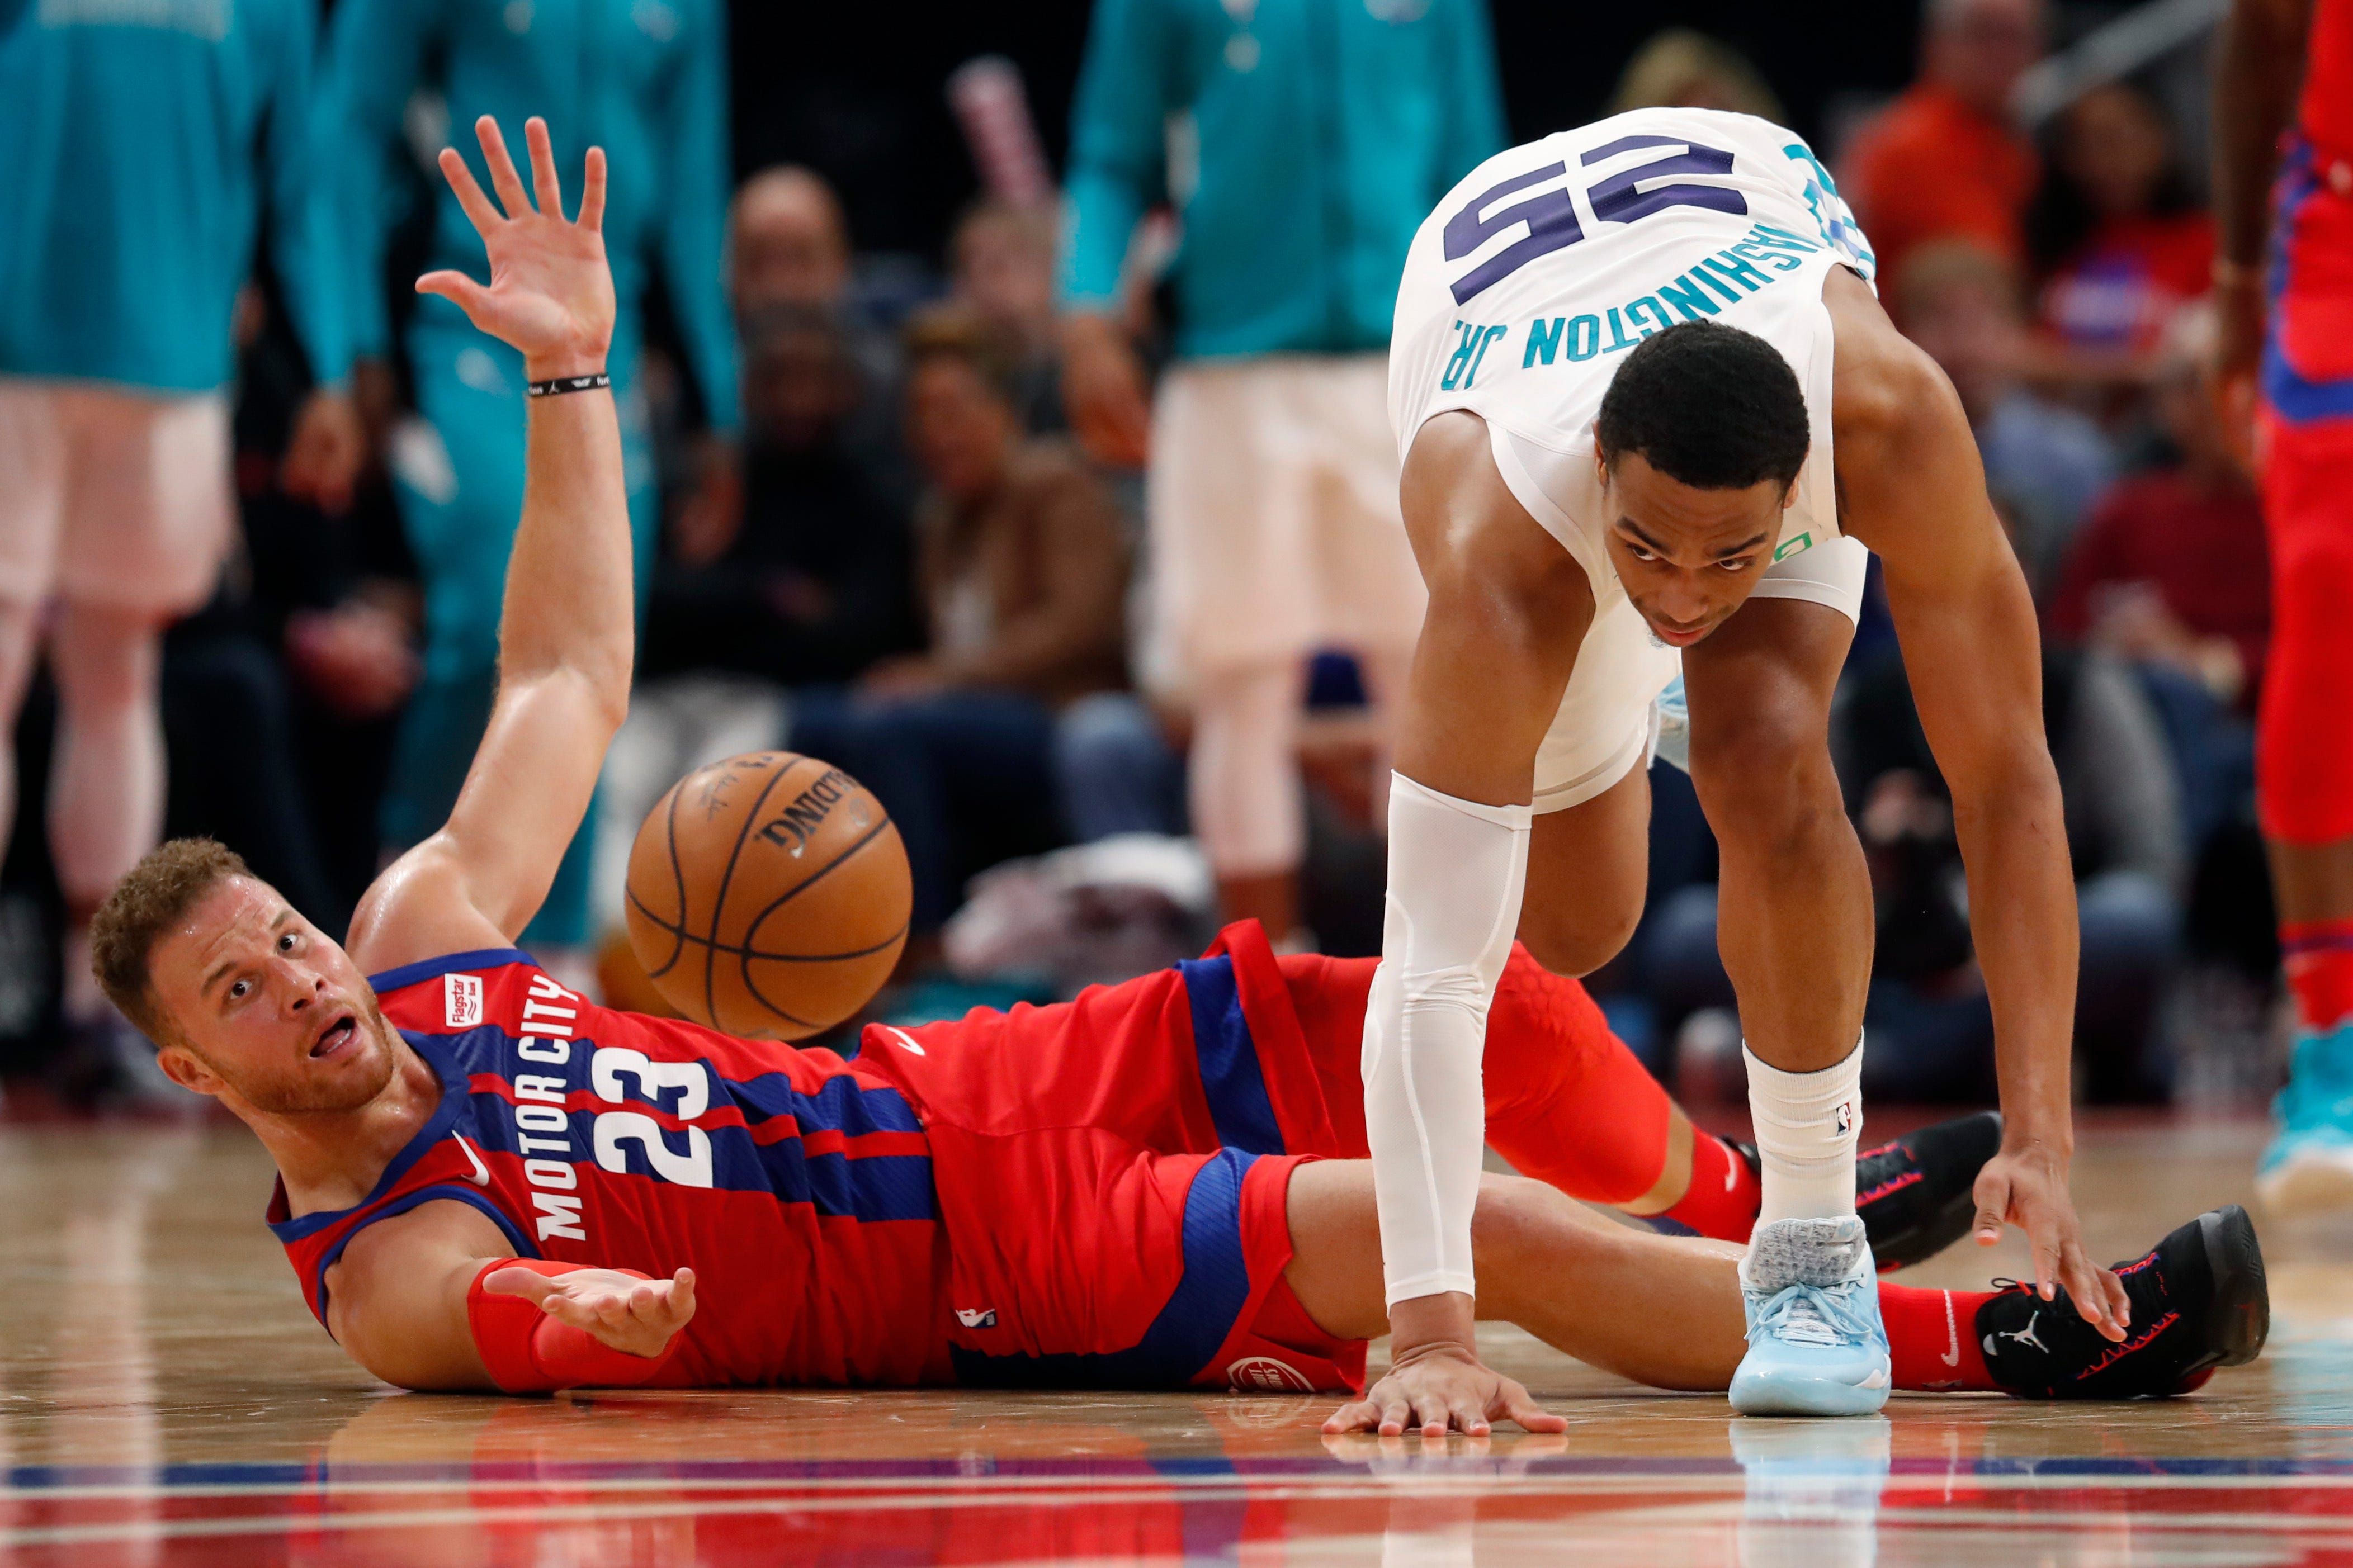 Pistons forward Blake Griffin looks on as Hornets forward PJ Washington chases the loose ball during the second half.